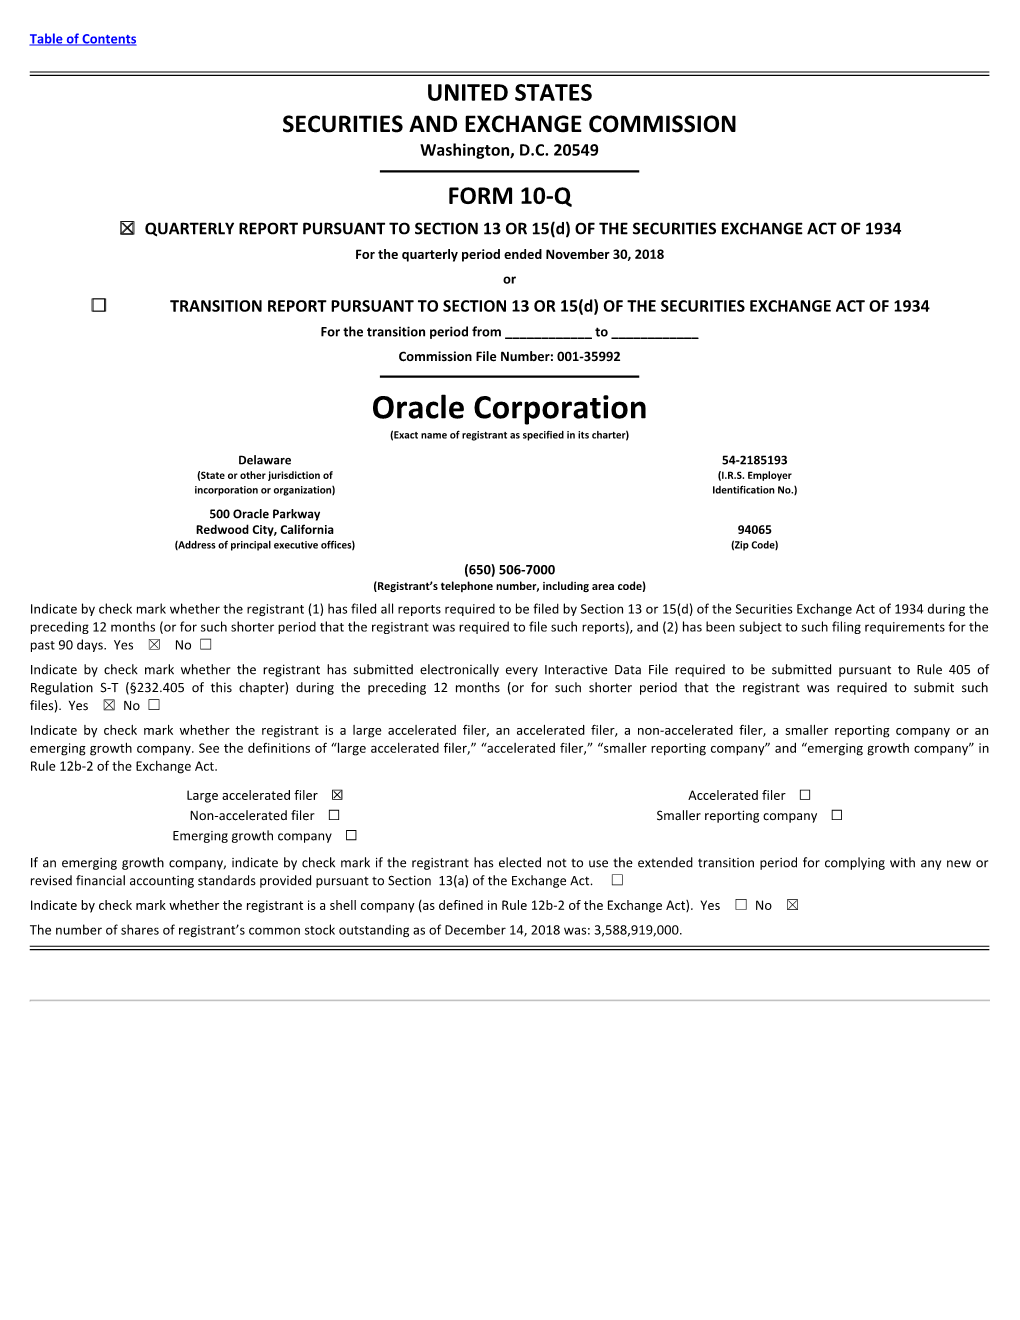 Oracle Corporation (Exact Name of Registrant As Specified in Its Charter)